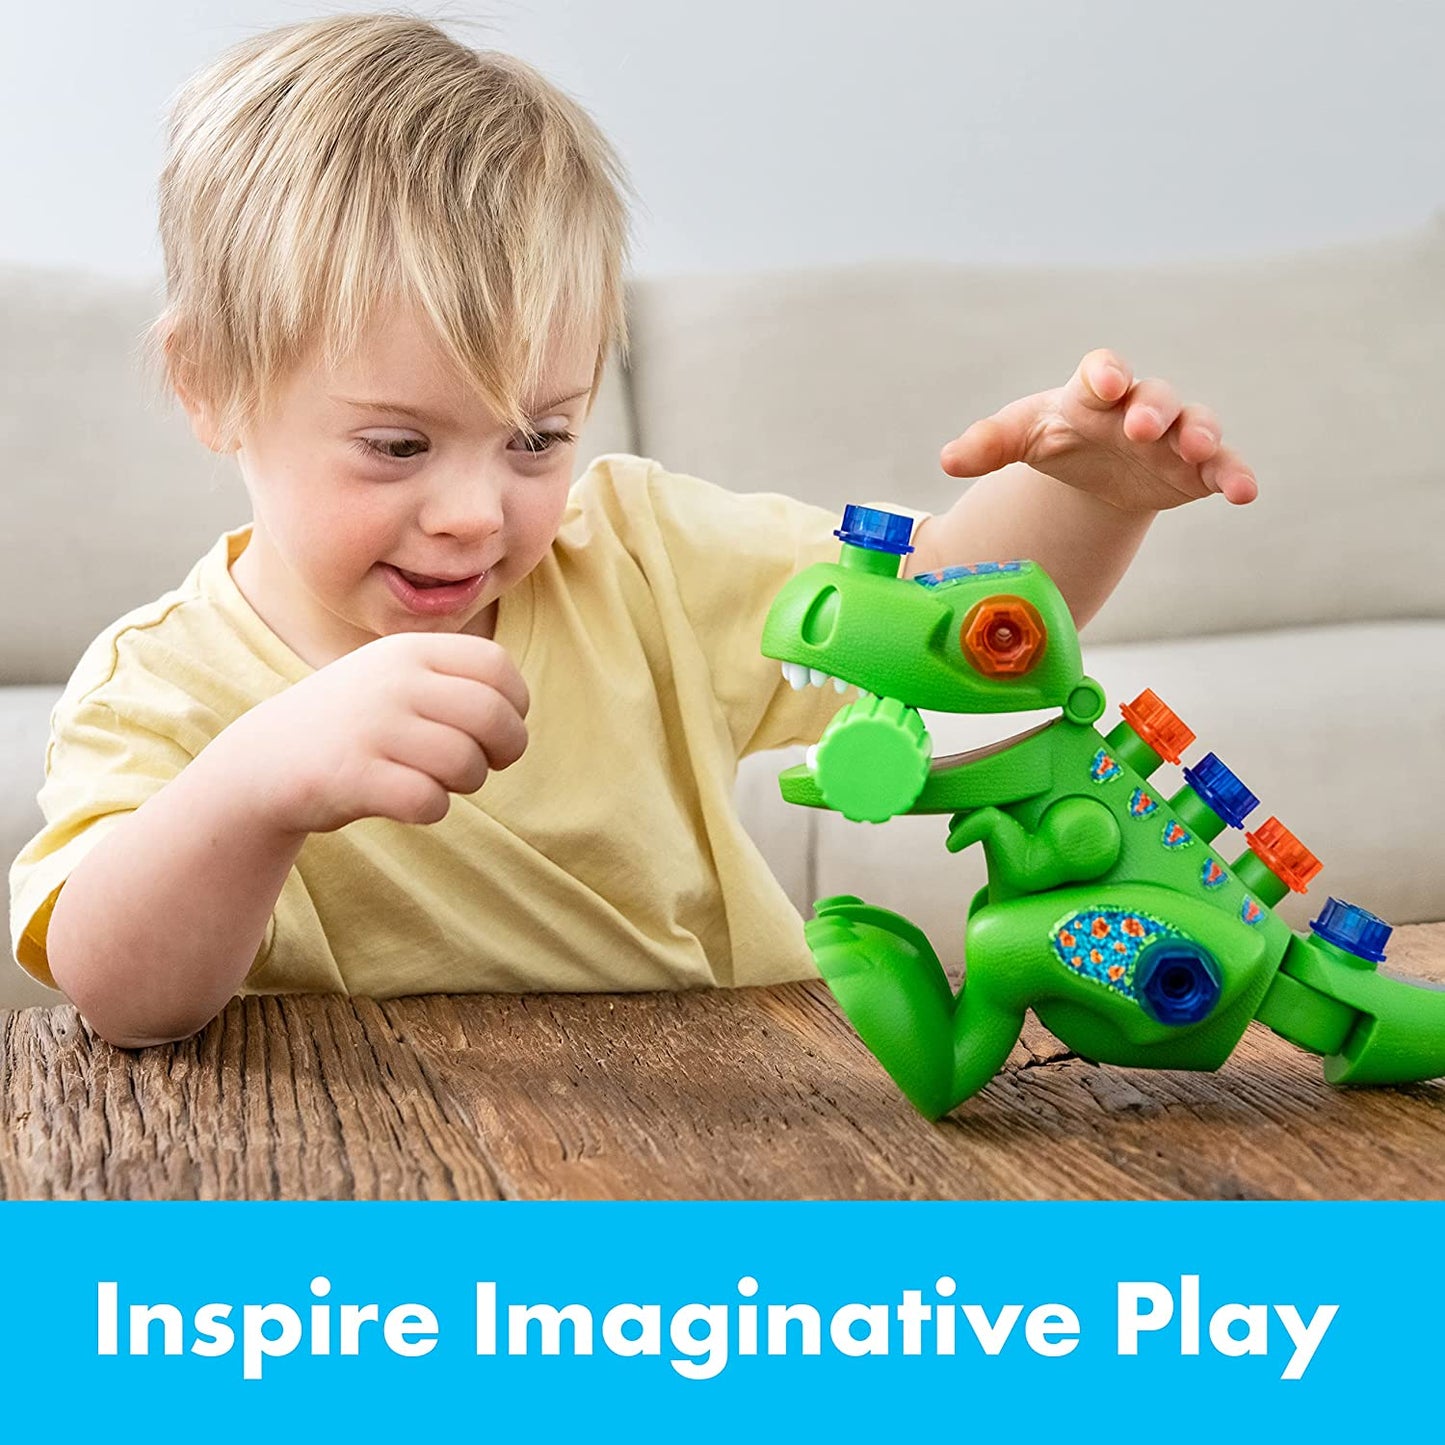 Roar into STEM learning with this preschool engineering playset! Includes T-Rex dinosaur with movable mouth and legs, 9 colorful bolts and kid-friendly screwdriver No batteries required